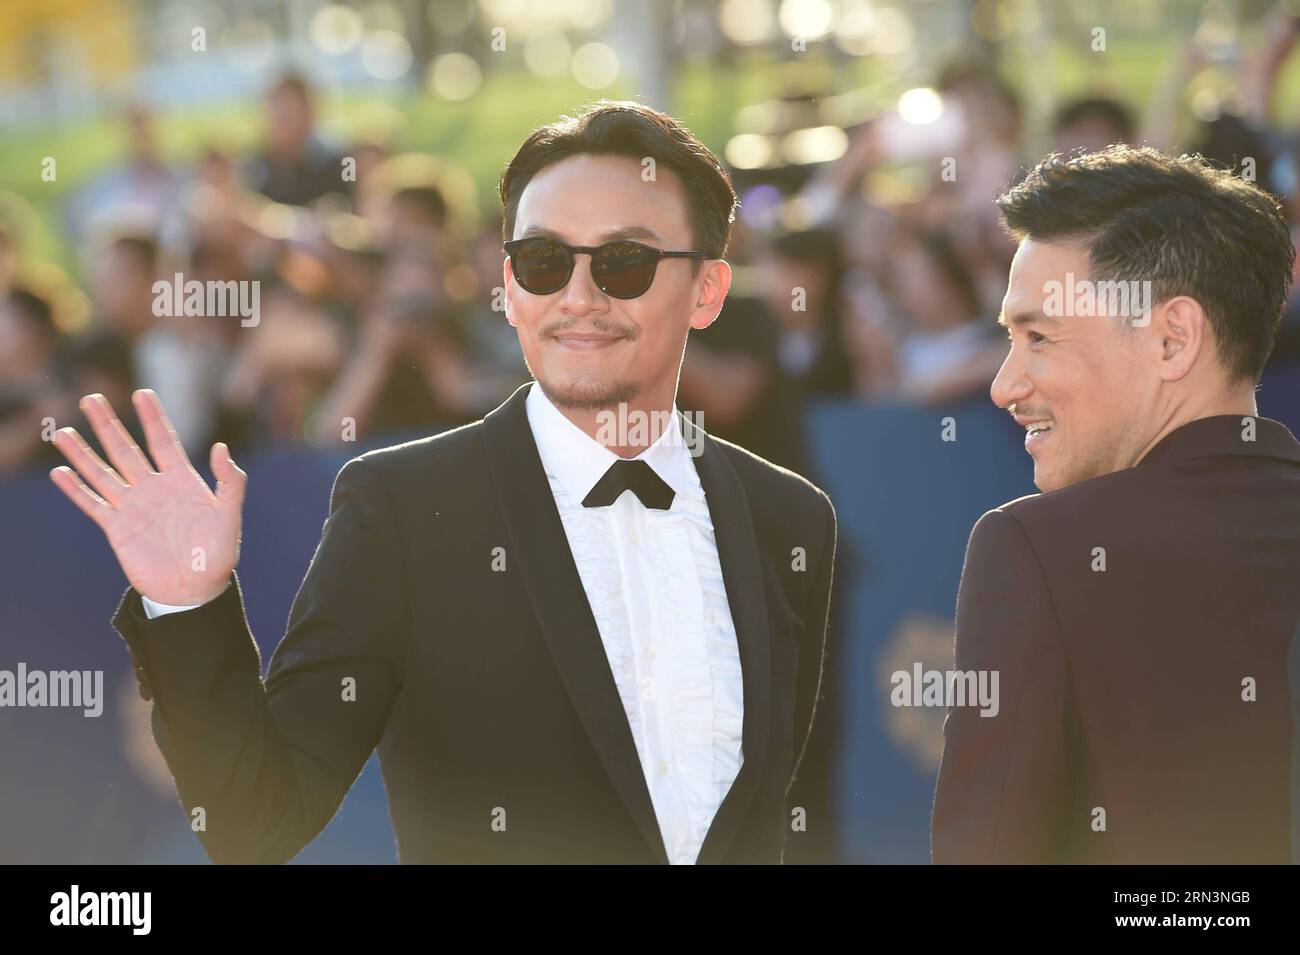 (150423) -- BEIJING, April 23, 2015 -- Actor Chang Chen (L) and Jacky Cheung attend the closing ceremony of the fifth Beijing International Film Festival (BJIFF) in Beijing, capital of China, April 23, 2015. The BJIFF closed here on Thursday. ) (mp) CHINA-BEIJING-FILM FESTIVAL-CLOSING (CN) ShenxHong PUBLICATIONxNOTxINxCHN   Beijing April 23 2015 Actor Chang Chen l and Jacky Cheung attend The CLOSING Ceremony of The Fifth Beijing International Film Festival  in Beijing Capital of China April 23 2015 The  Closed Here ON Thursday MP China Beijing Film Festival CLOSING CN ShenxHong PUBLICATIONxNOT Stock Photo